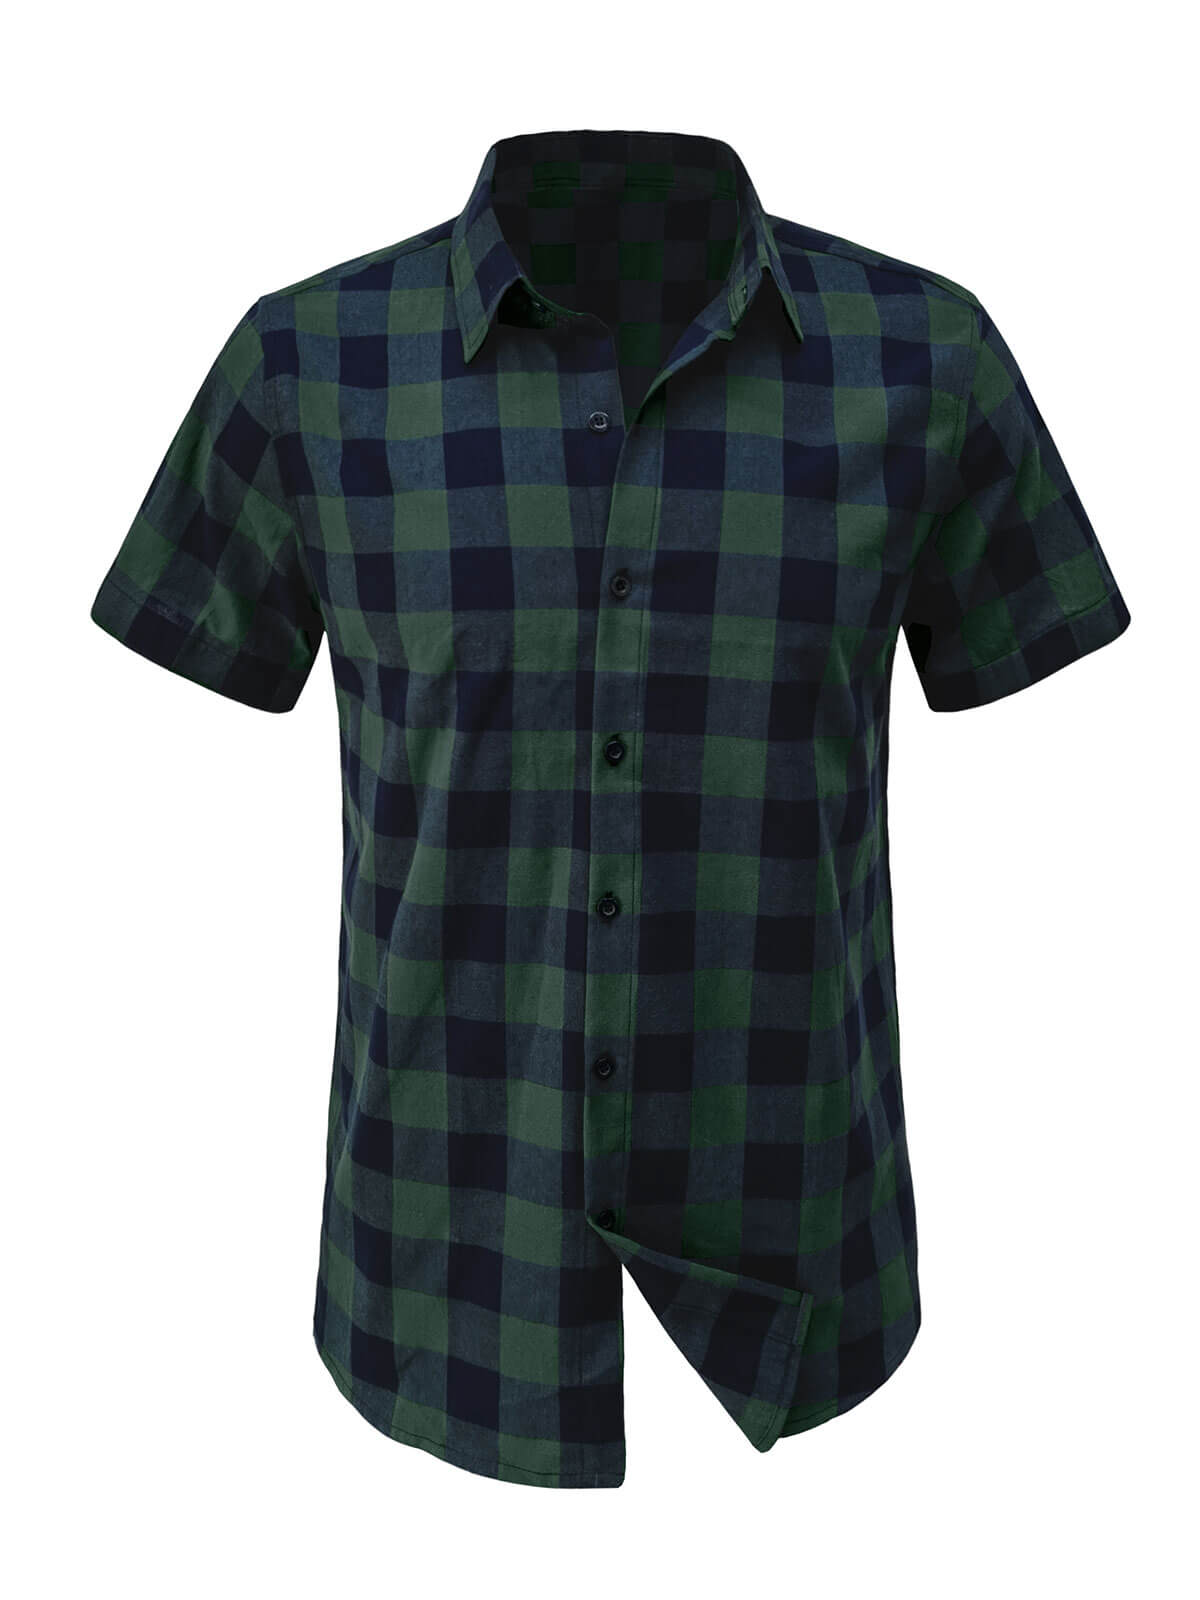 Men's Check Casual Cotton Button Up Plaid Holiday Short Sleeve Shirt